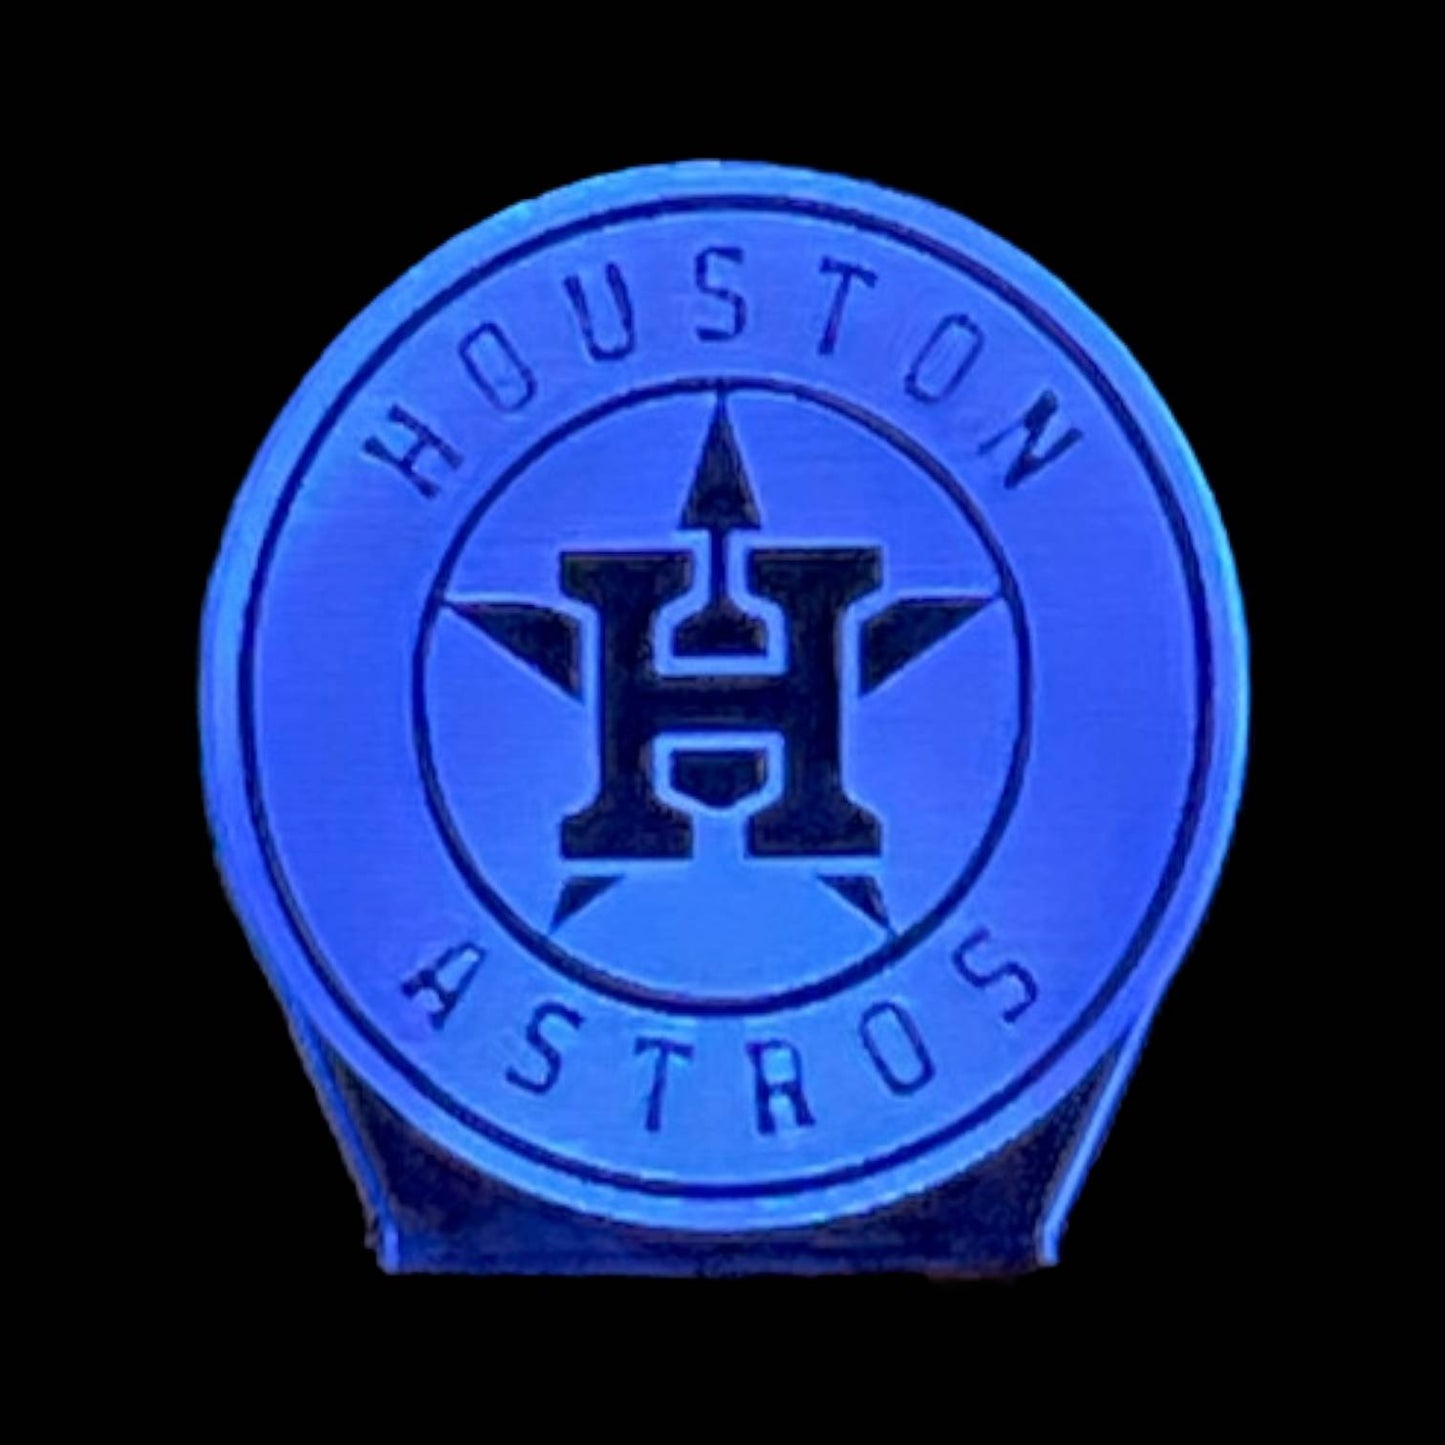 Houston Astros 3D LED Night-Light 7 Color Changing Lamp w/ Touch Switch